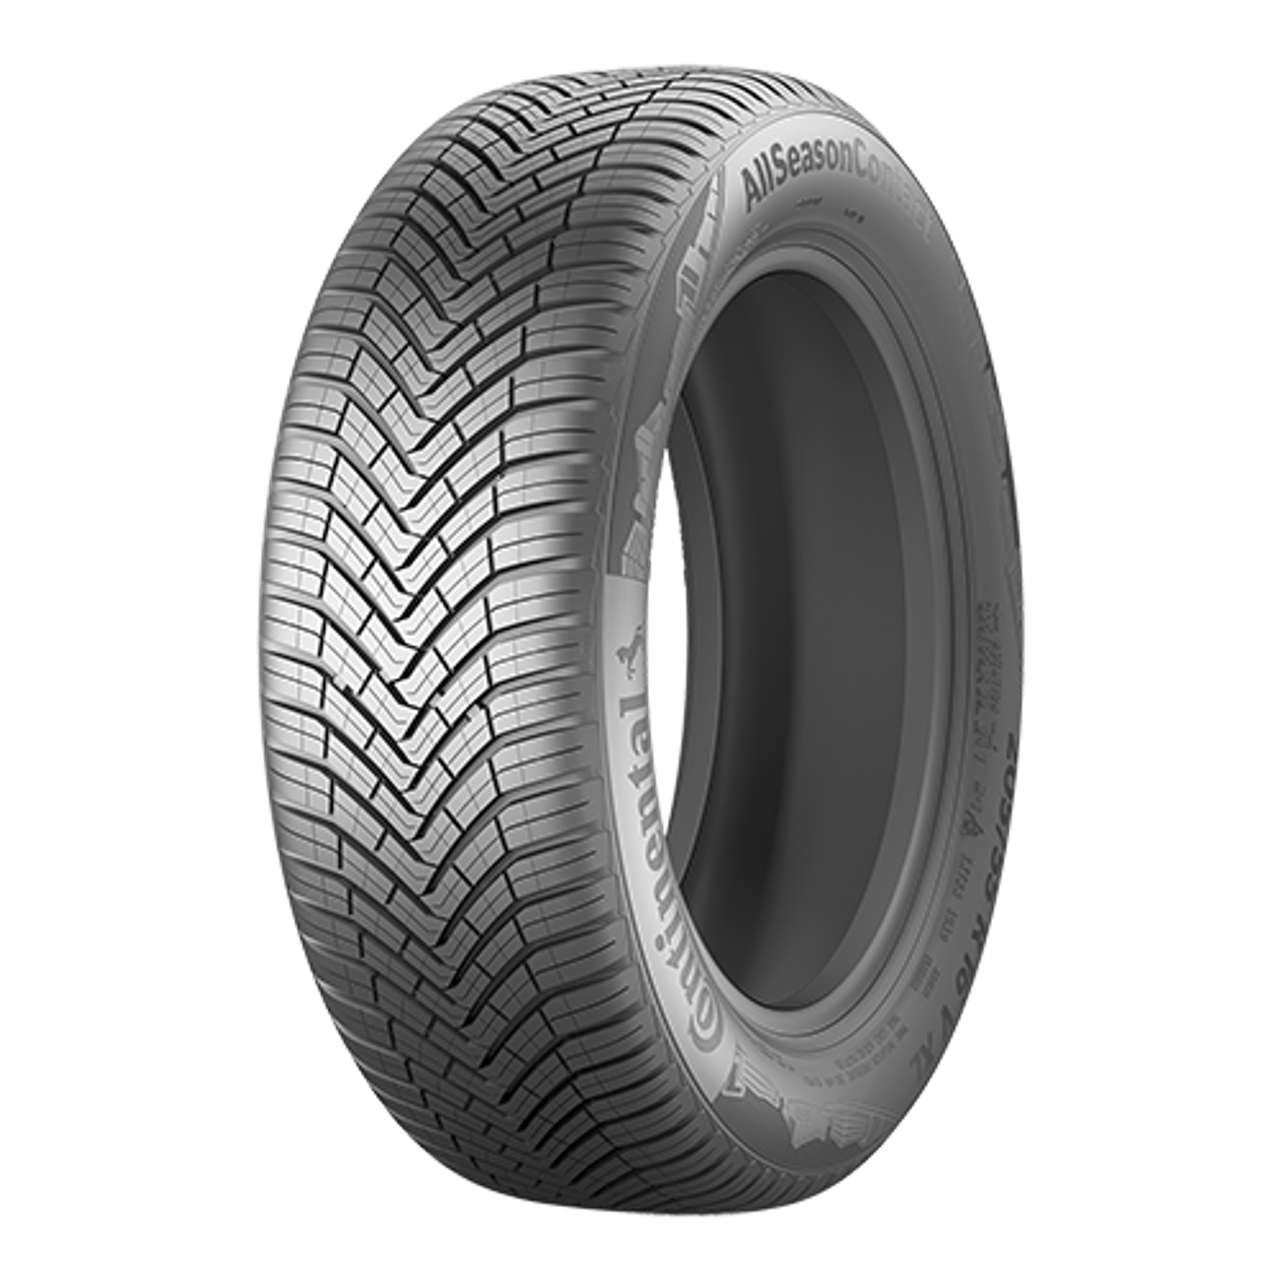 CONTINENTAL ALLSEASONCONTACT (EVc) 125/80R13 65M BSW